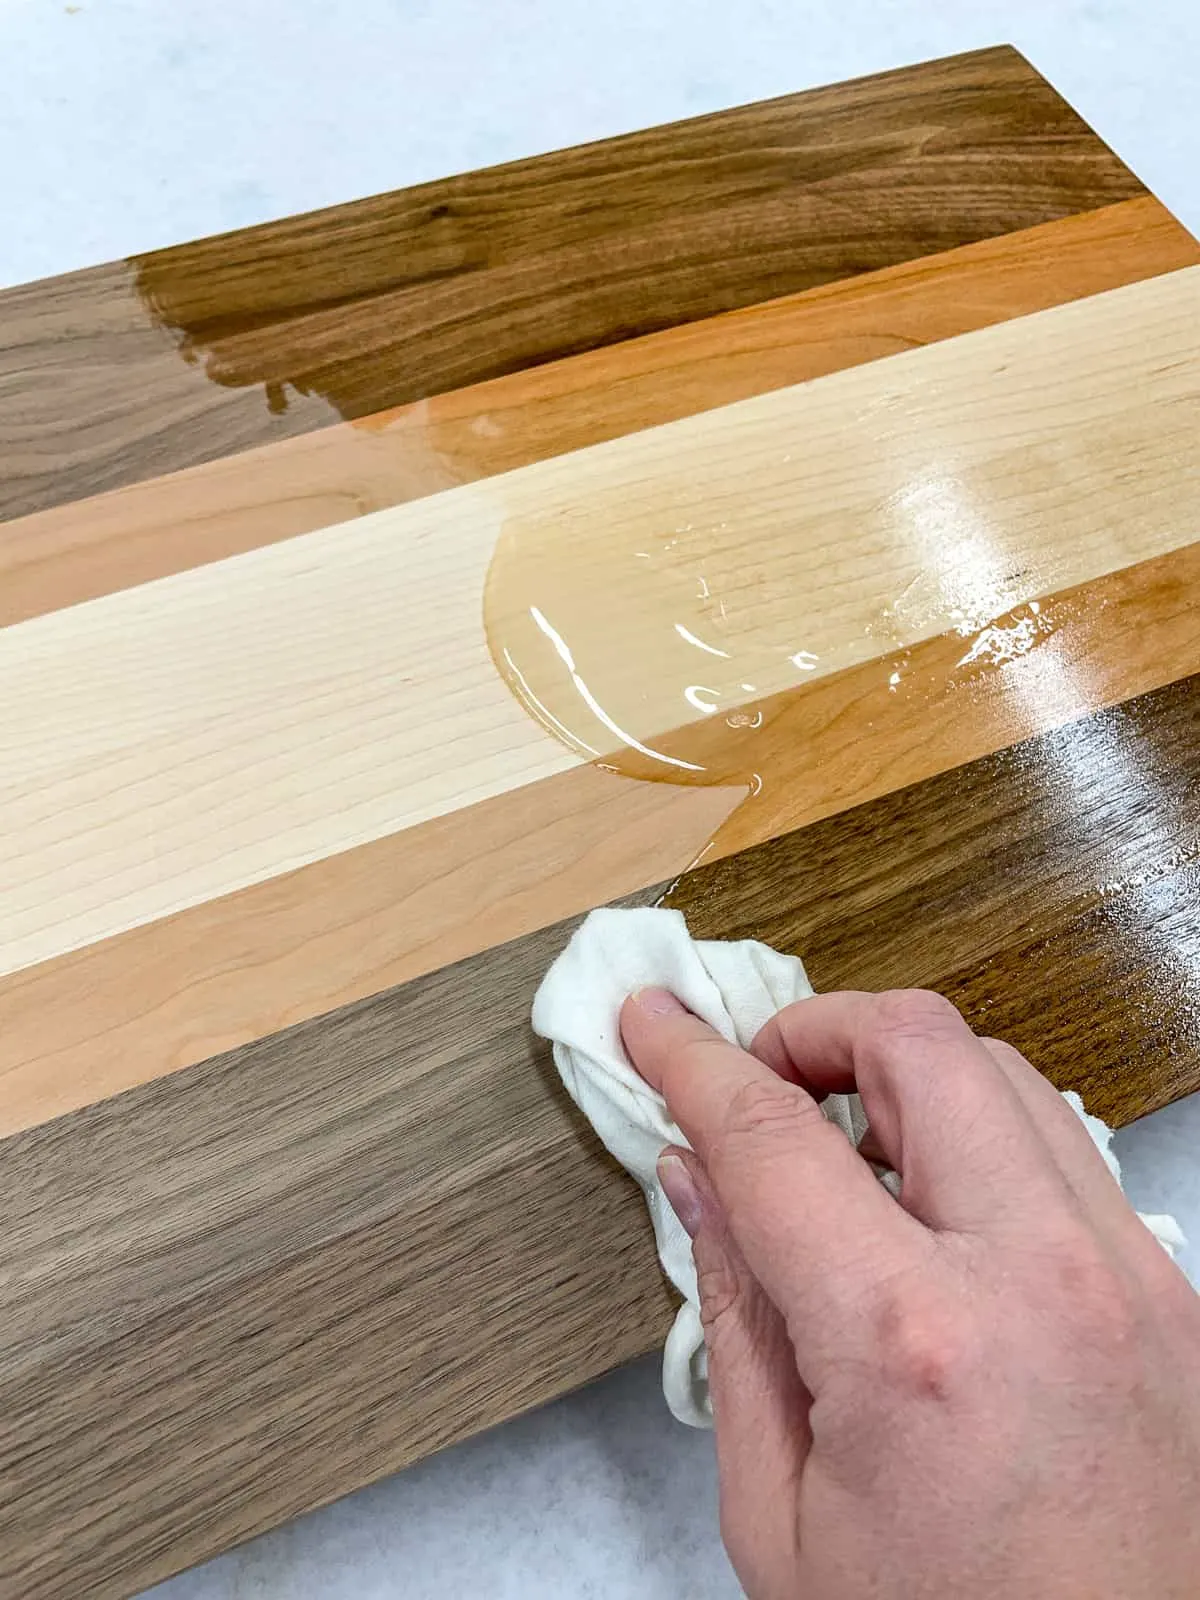 applying food safe oil to wooden cutting board